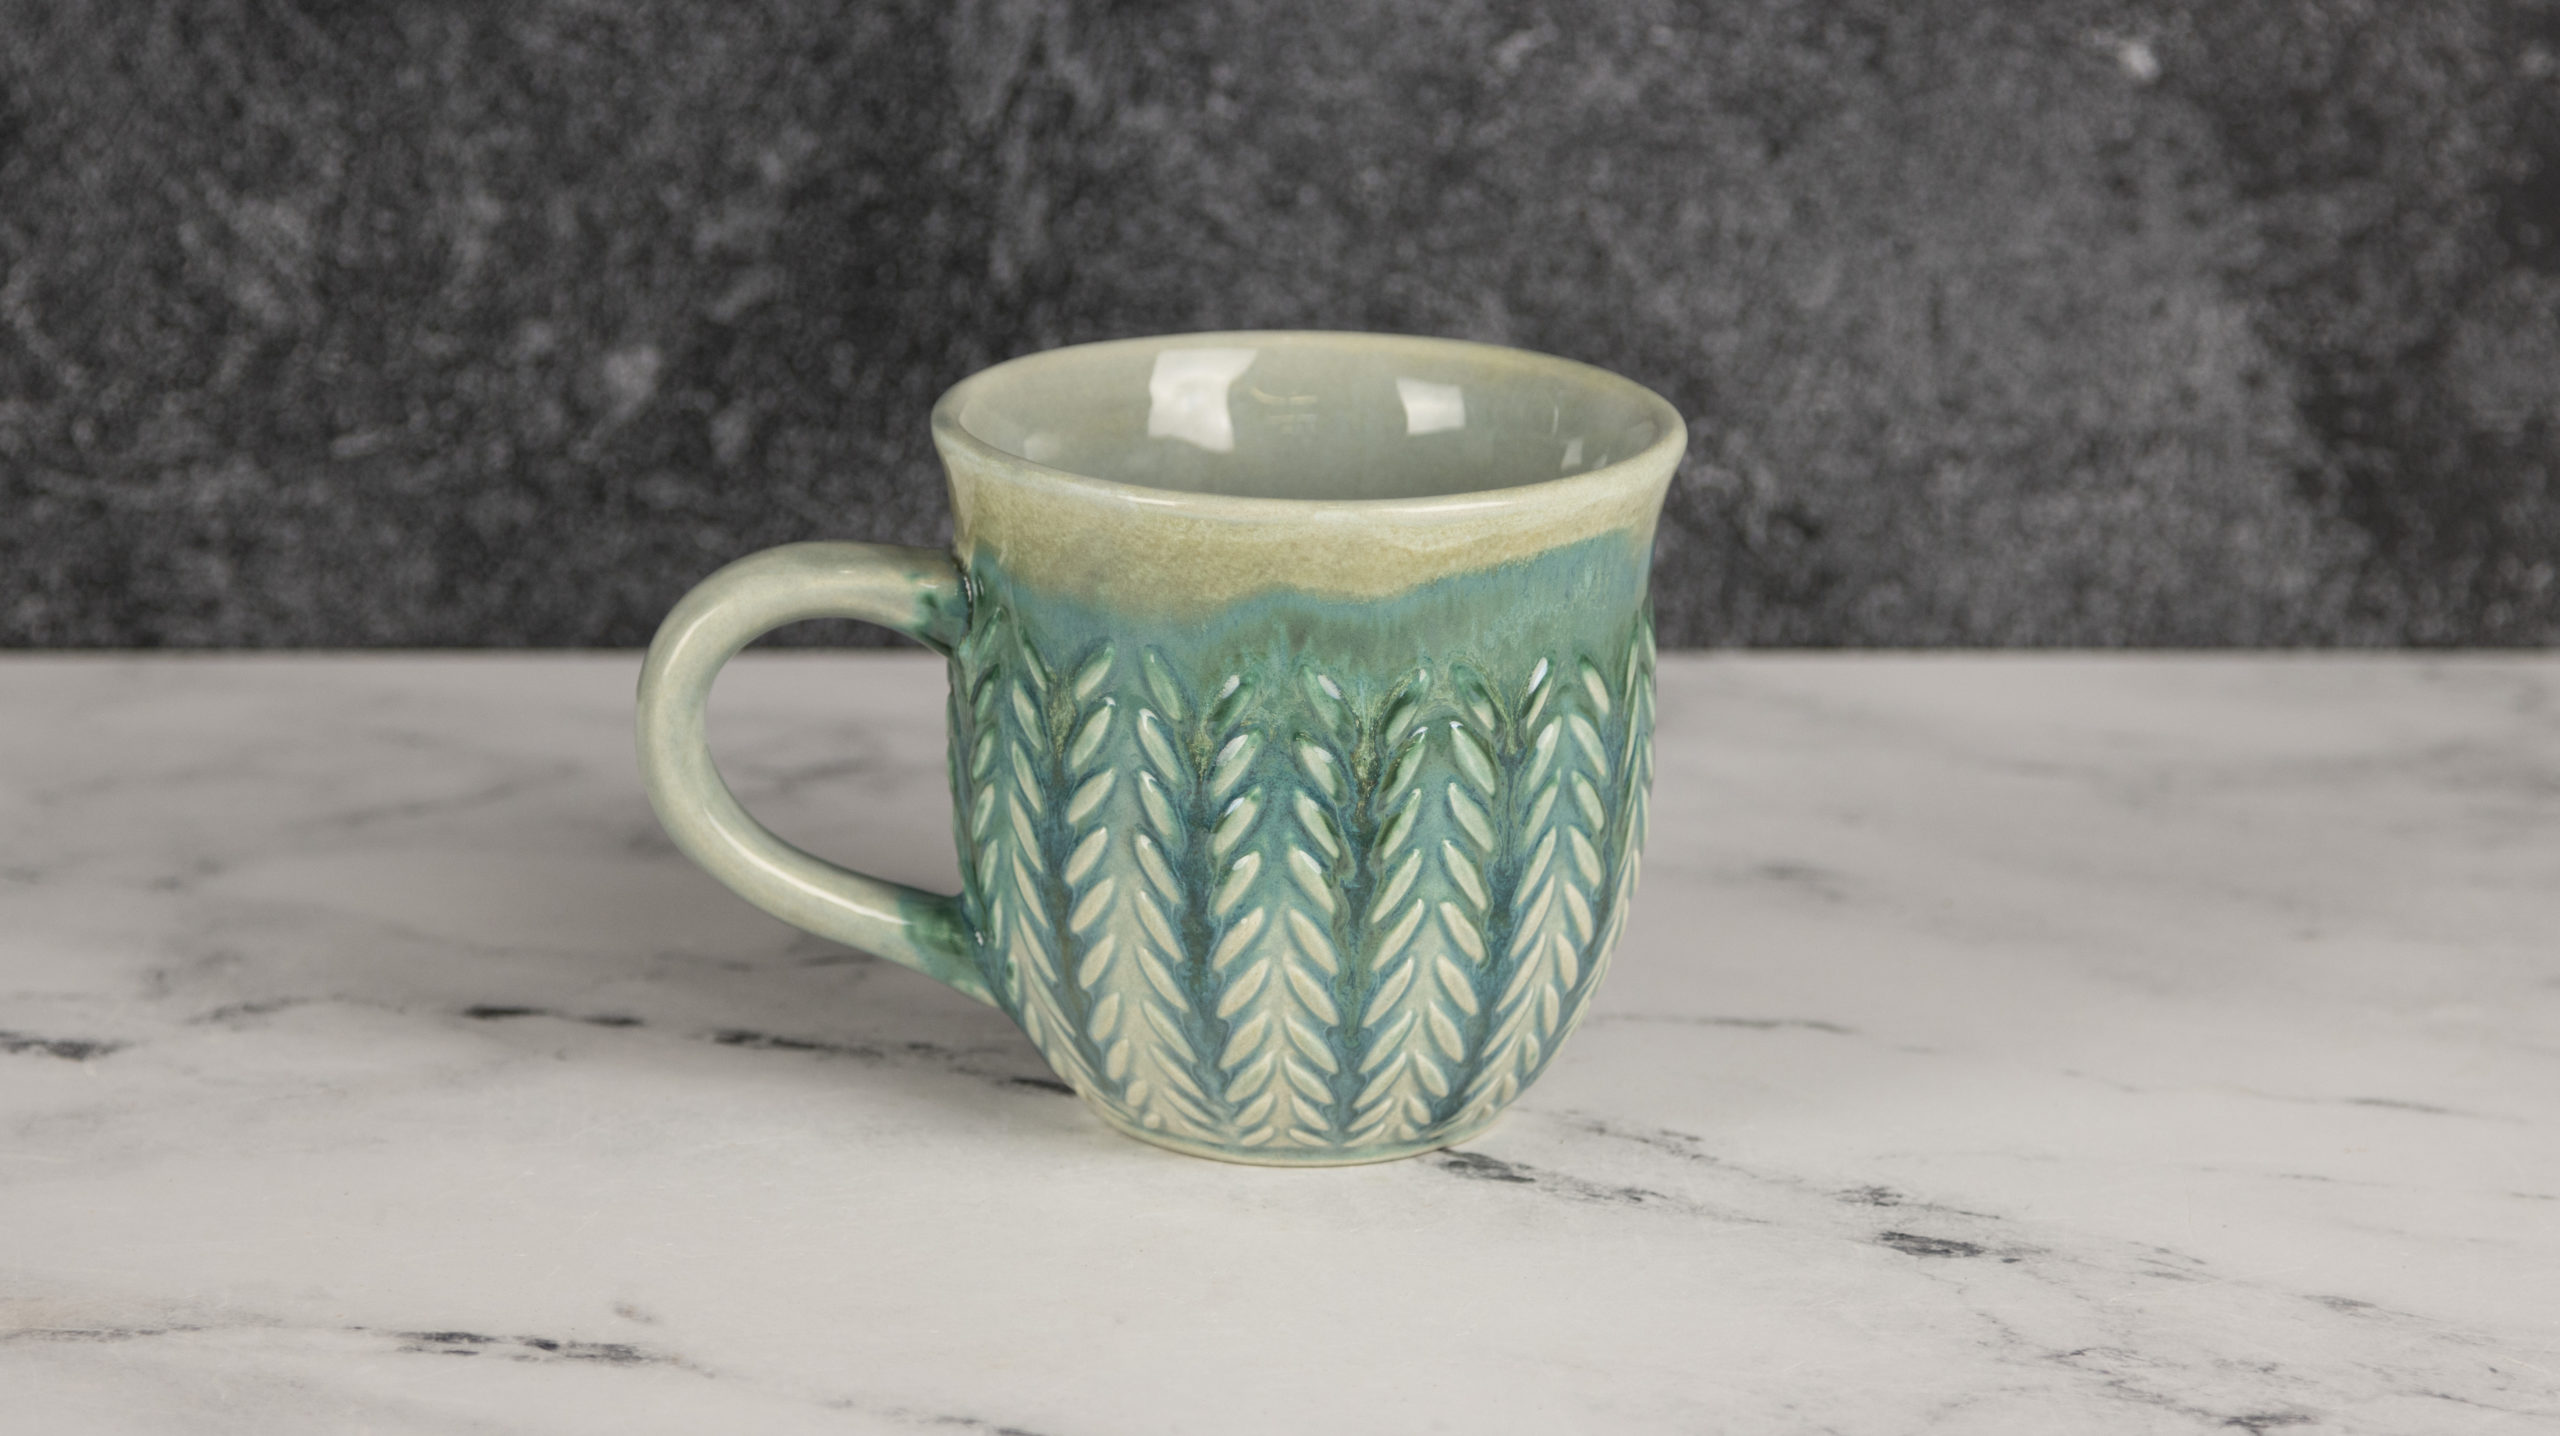 https://www.maycocolors.com/wp-content/uploads/2021/06/low-fire-stitched-mug-scaled.jpg